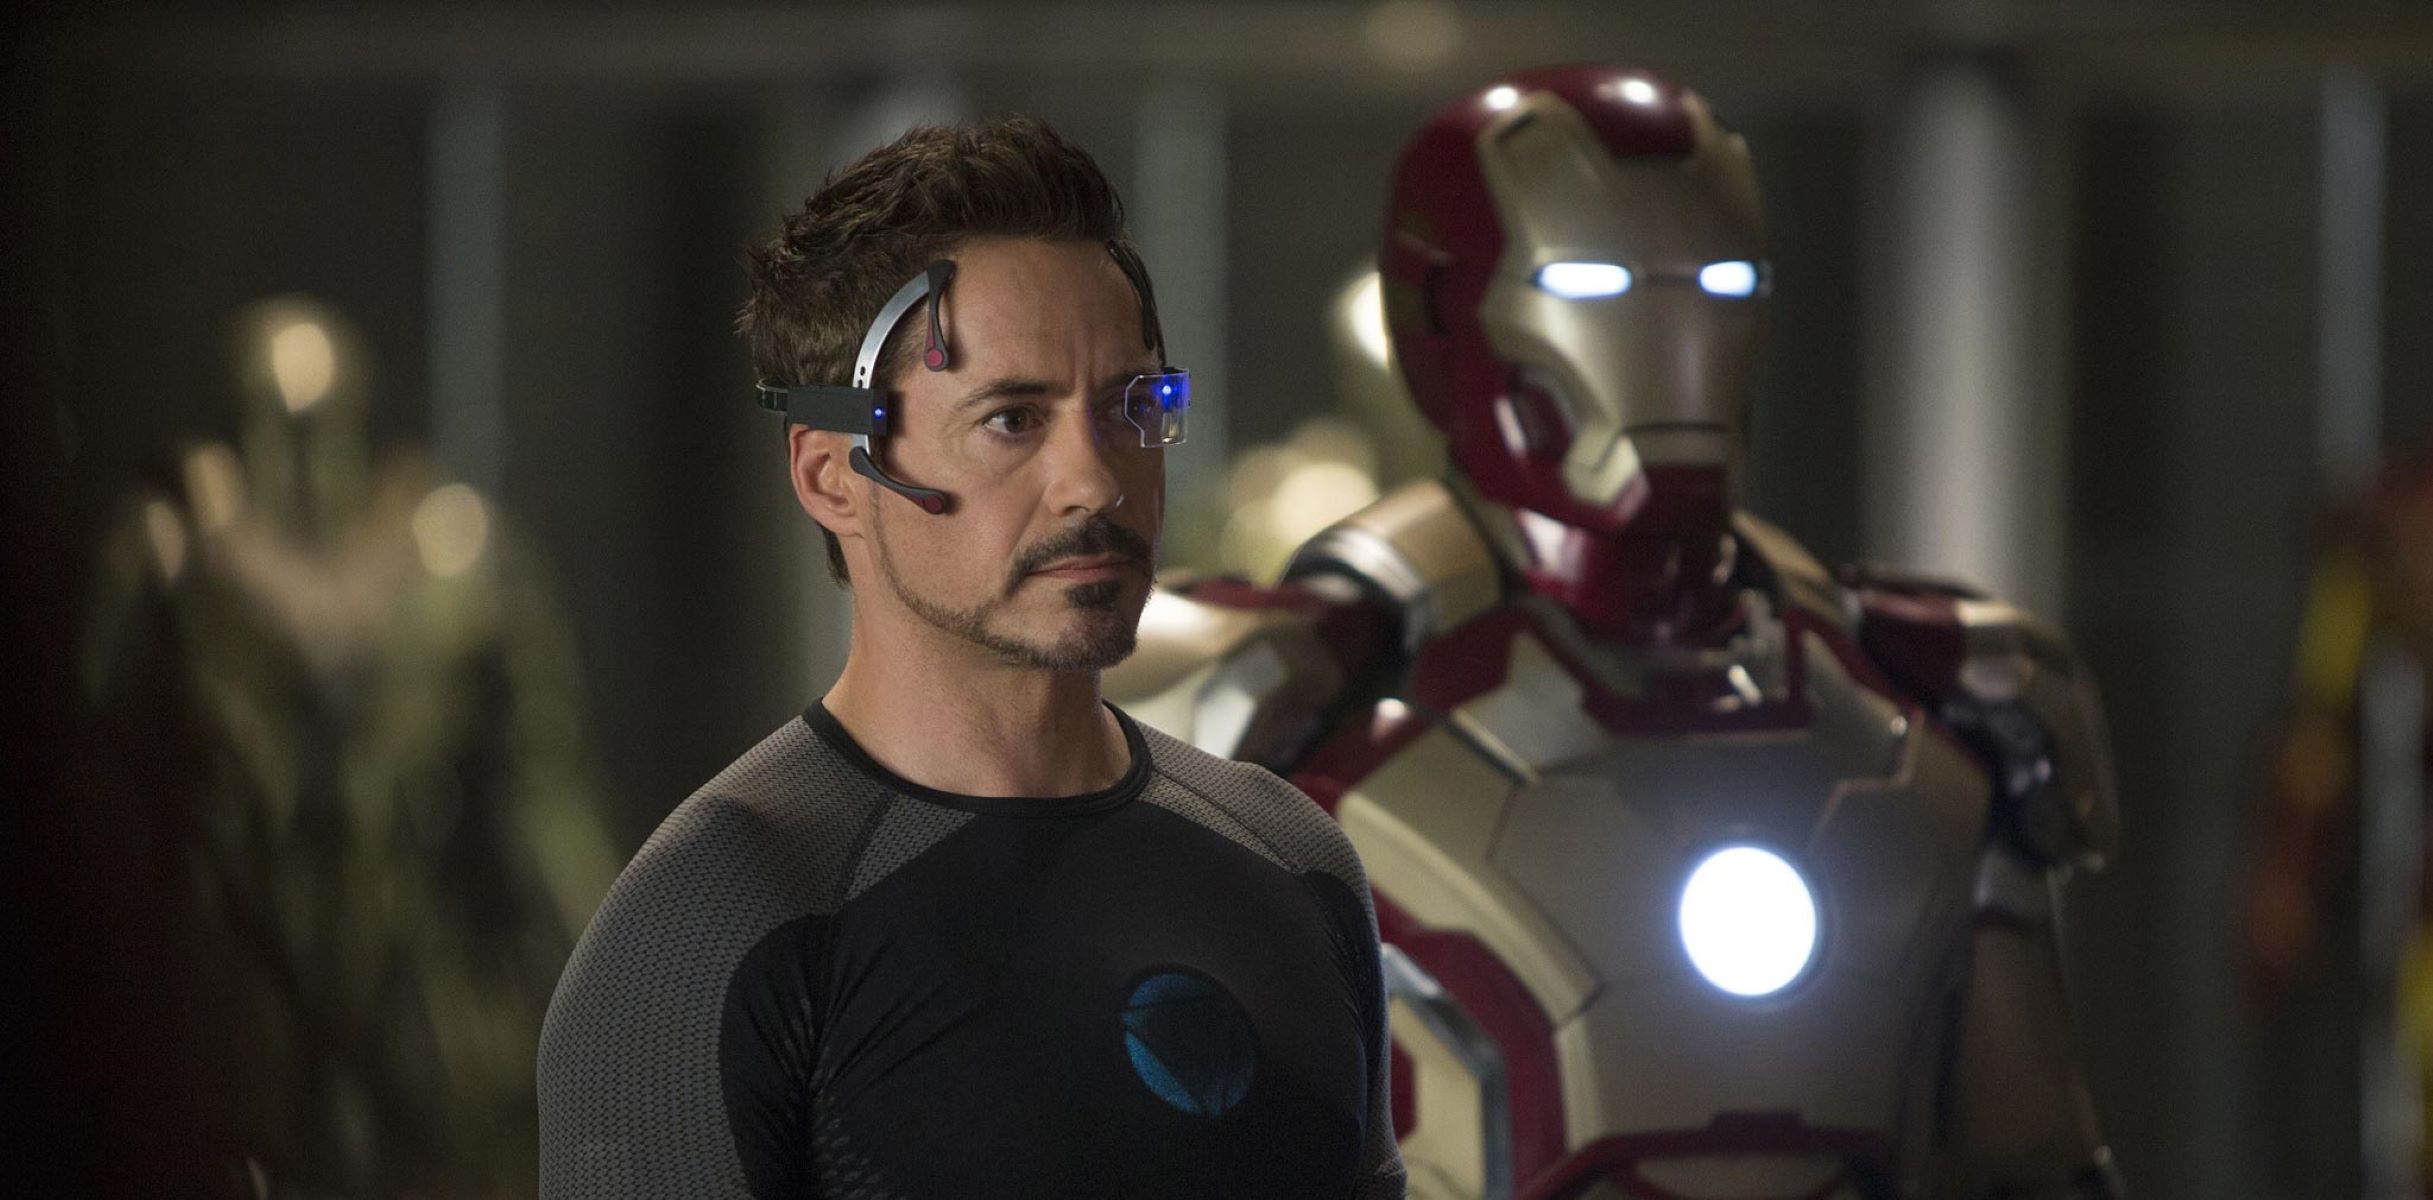 The Shocking Reason Fans Were Outraged By Iron Man’s Controversial Desire In Avengers: Age Of Ultron